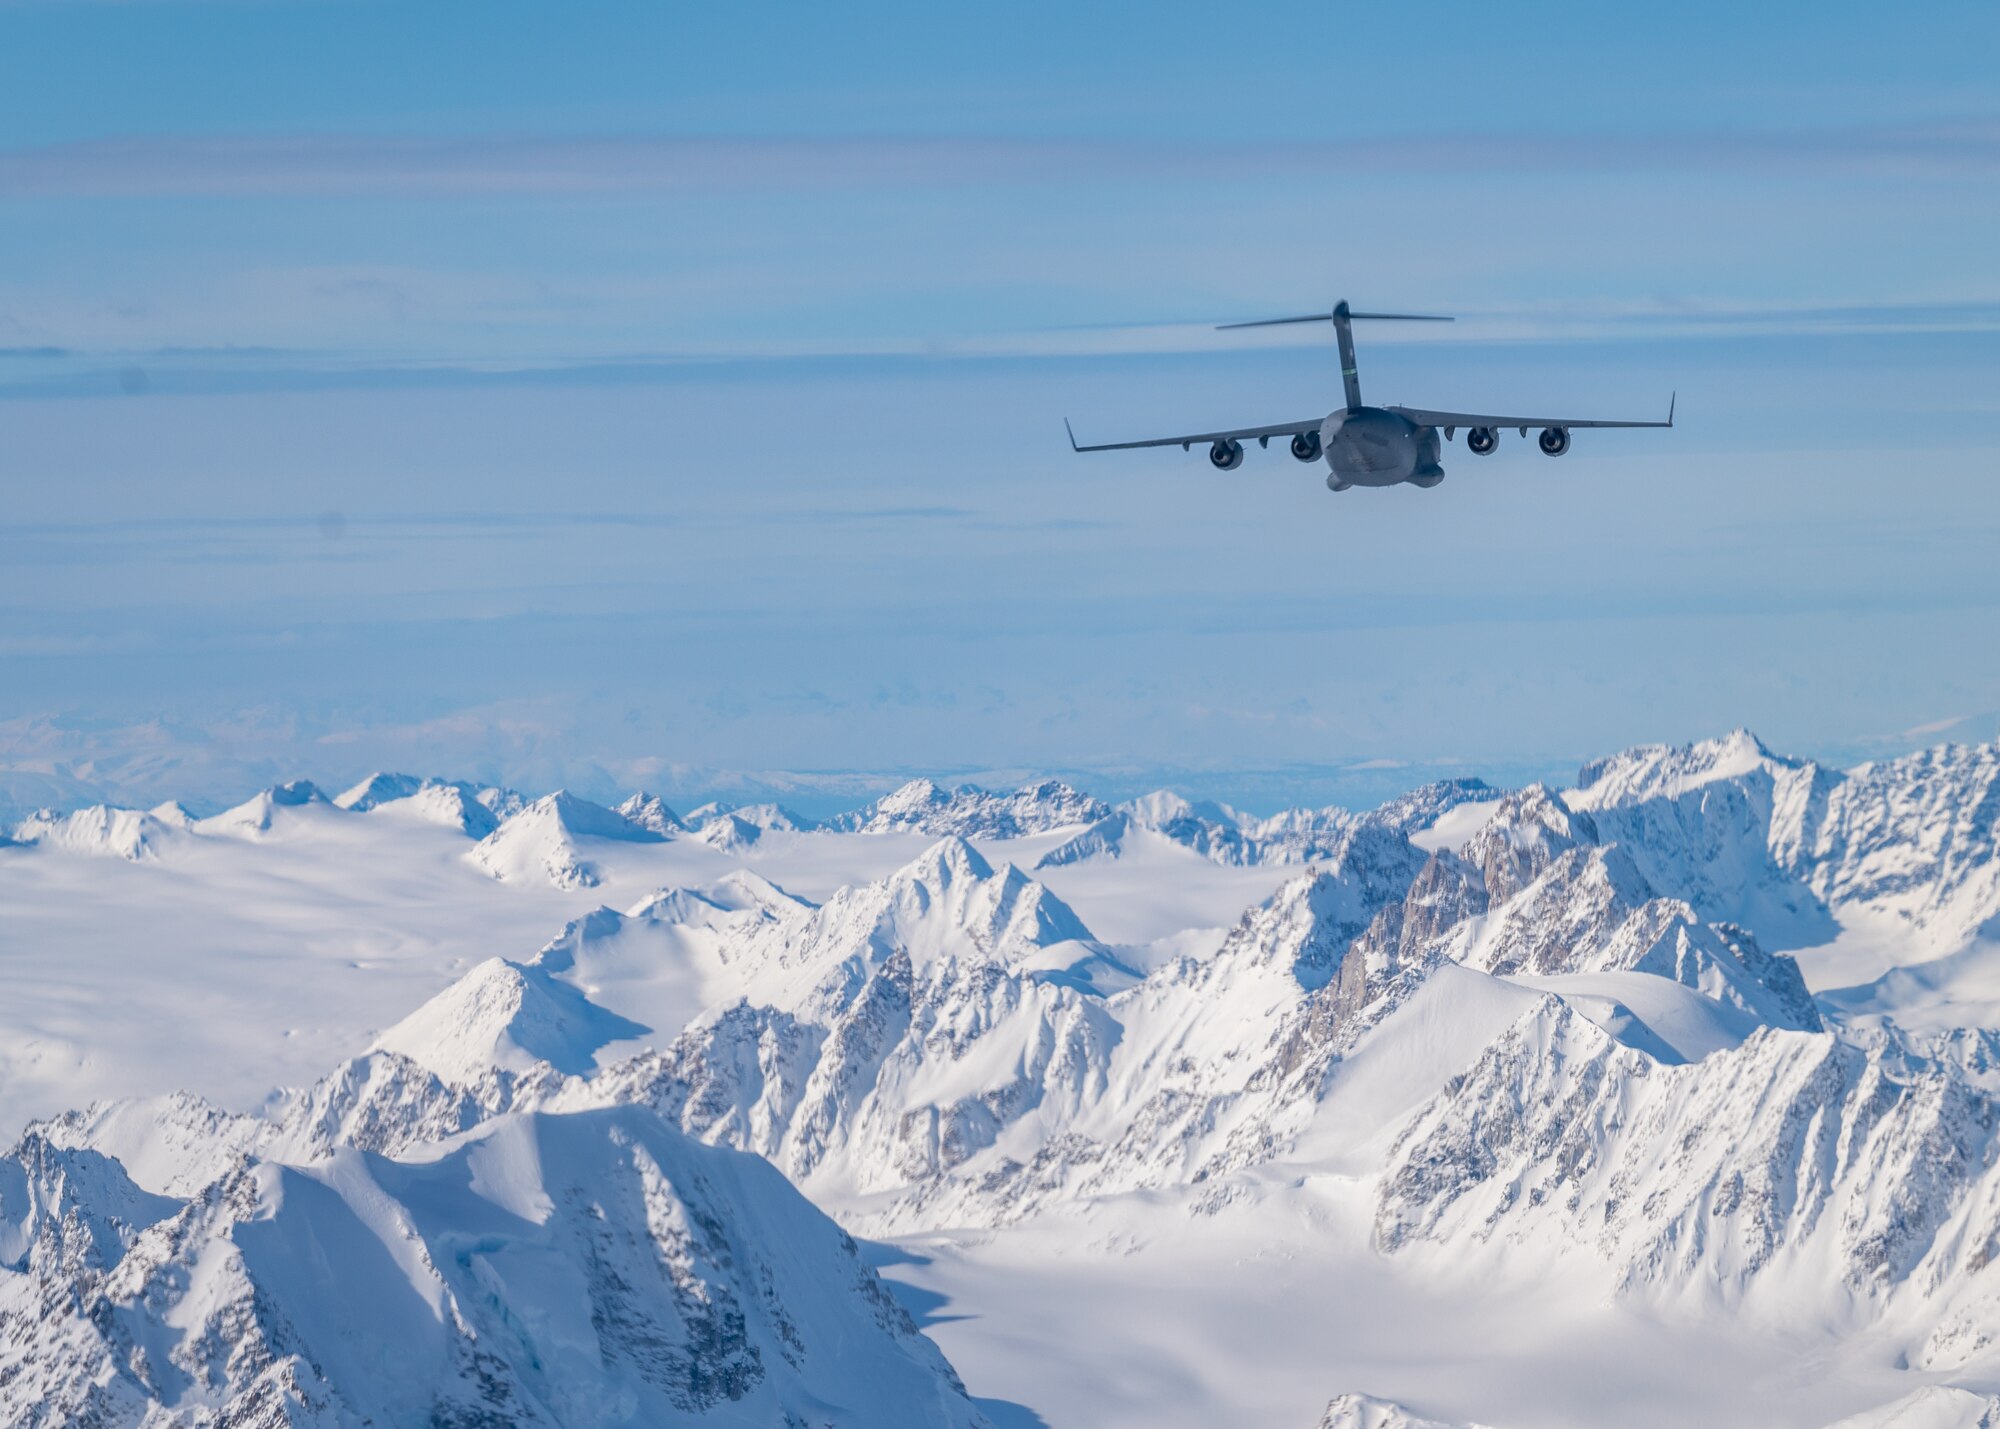 A U.S. Air Force C-17 Globemaster III assigned to Joint Base Lewis-McChord flies over the Alaska Range, Alaska, March 21, 2022, during Exercise Rainer War 22-A. The exercise is designed to demonstrate the 62nd Airlift wing’s ability to operate and survive while defeating challenges to the U.S. military advantage in all operating domains – air, land, sea and cyberspace. (U.S. Air Force photo by Airman 1st Class Charles Casner)